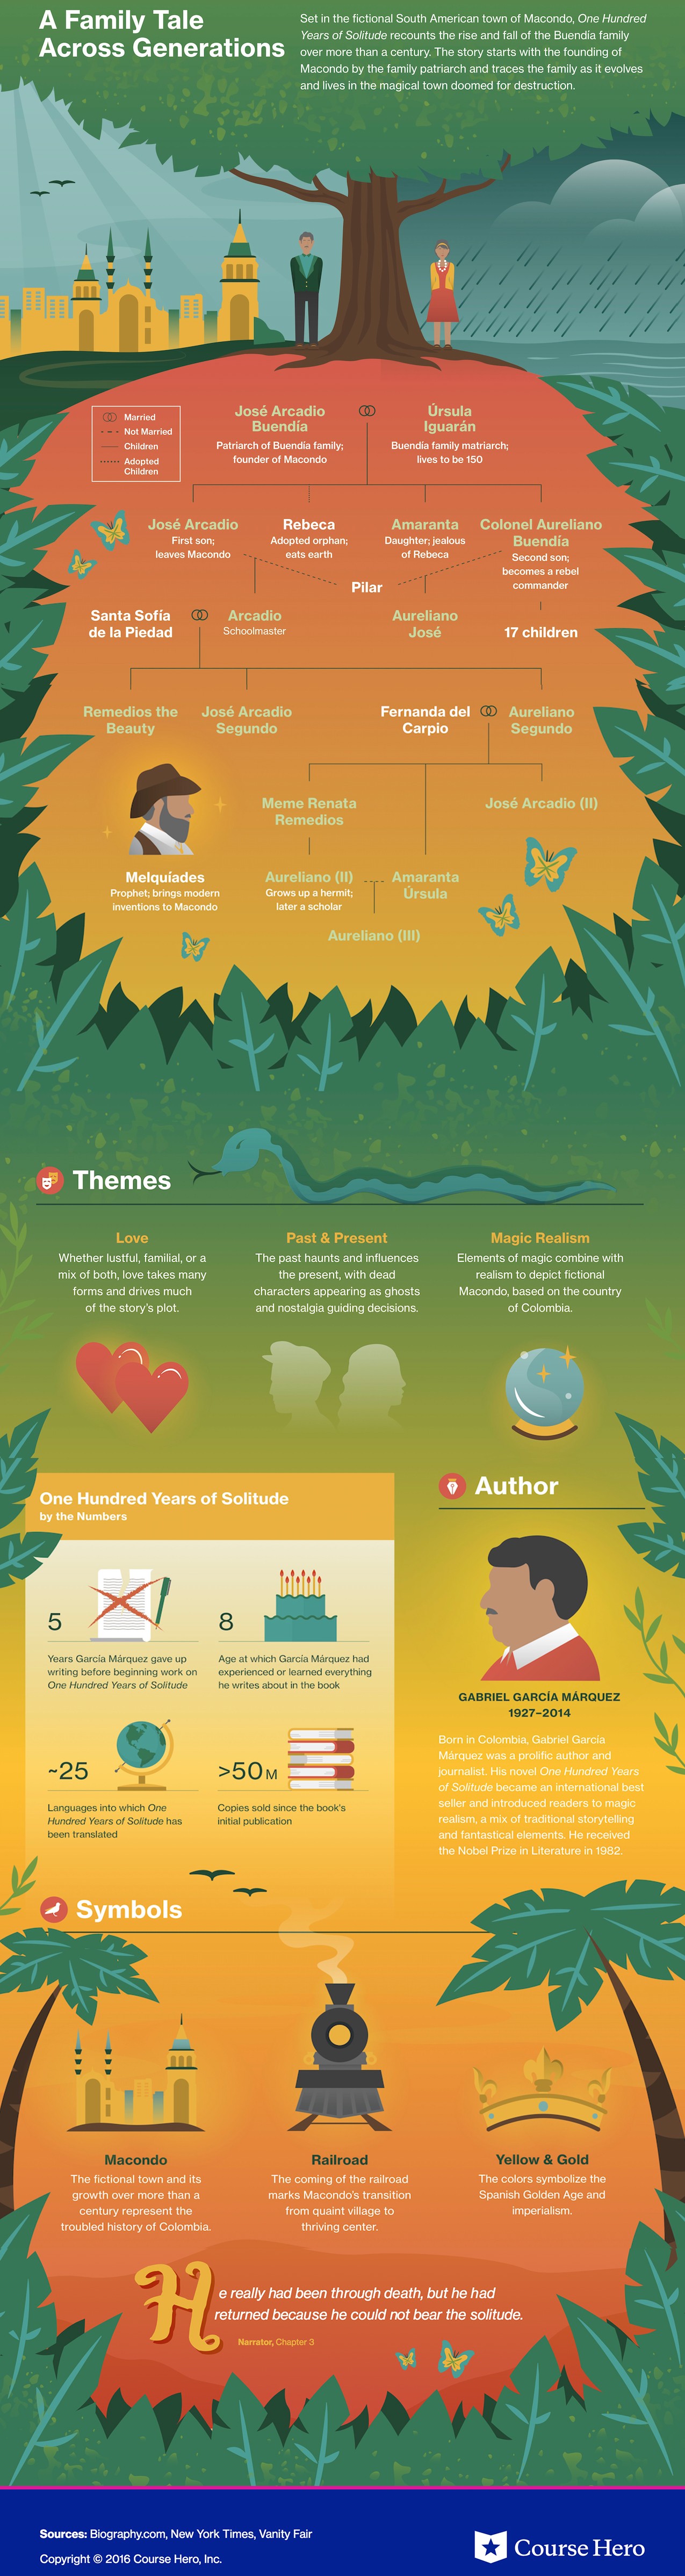 One Hundred Years of solitude infographic